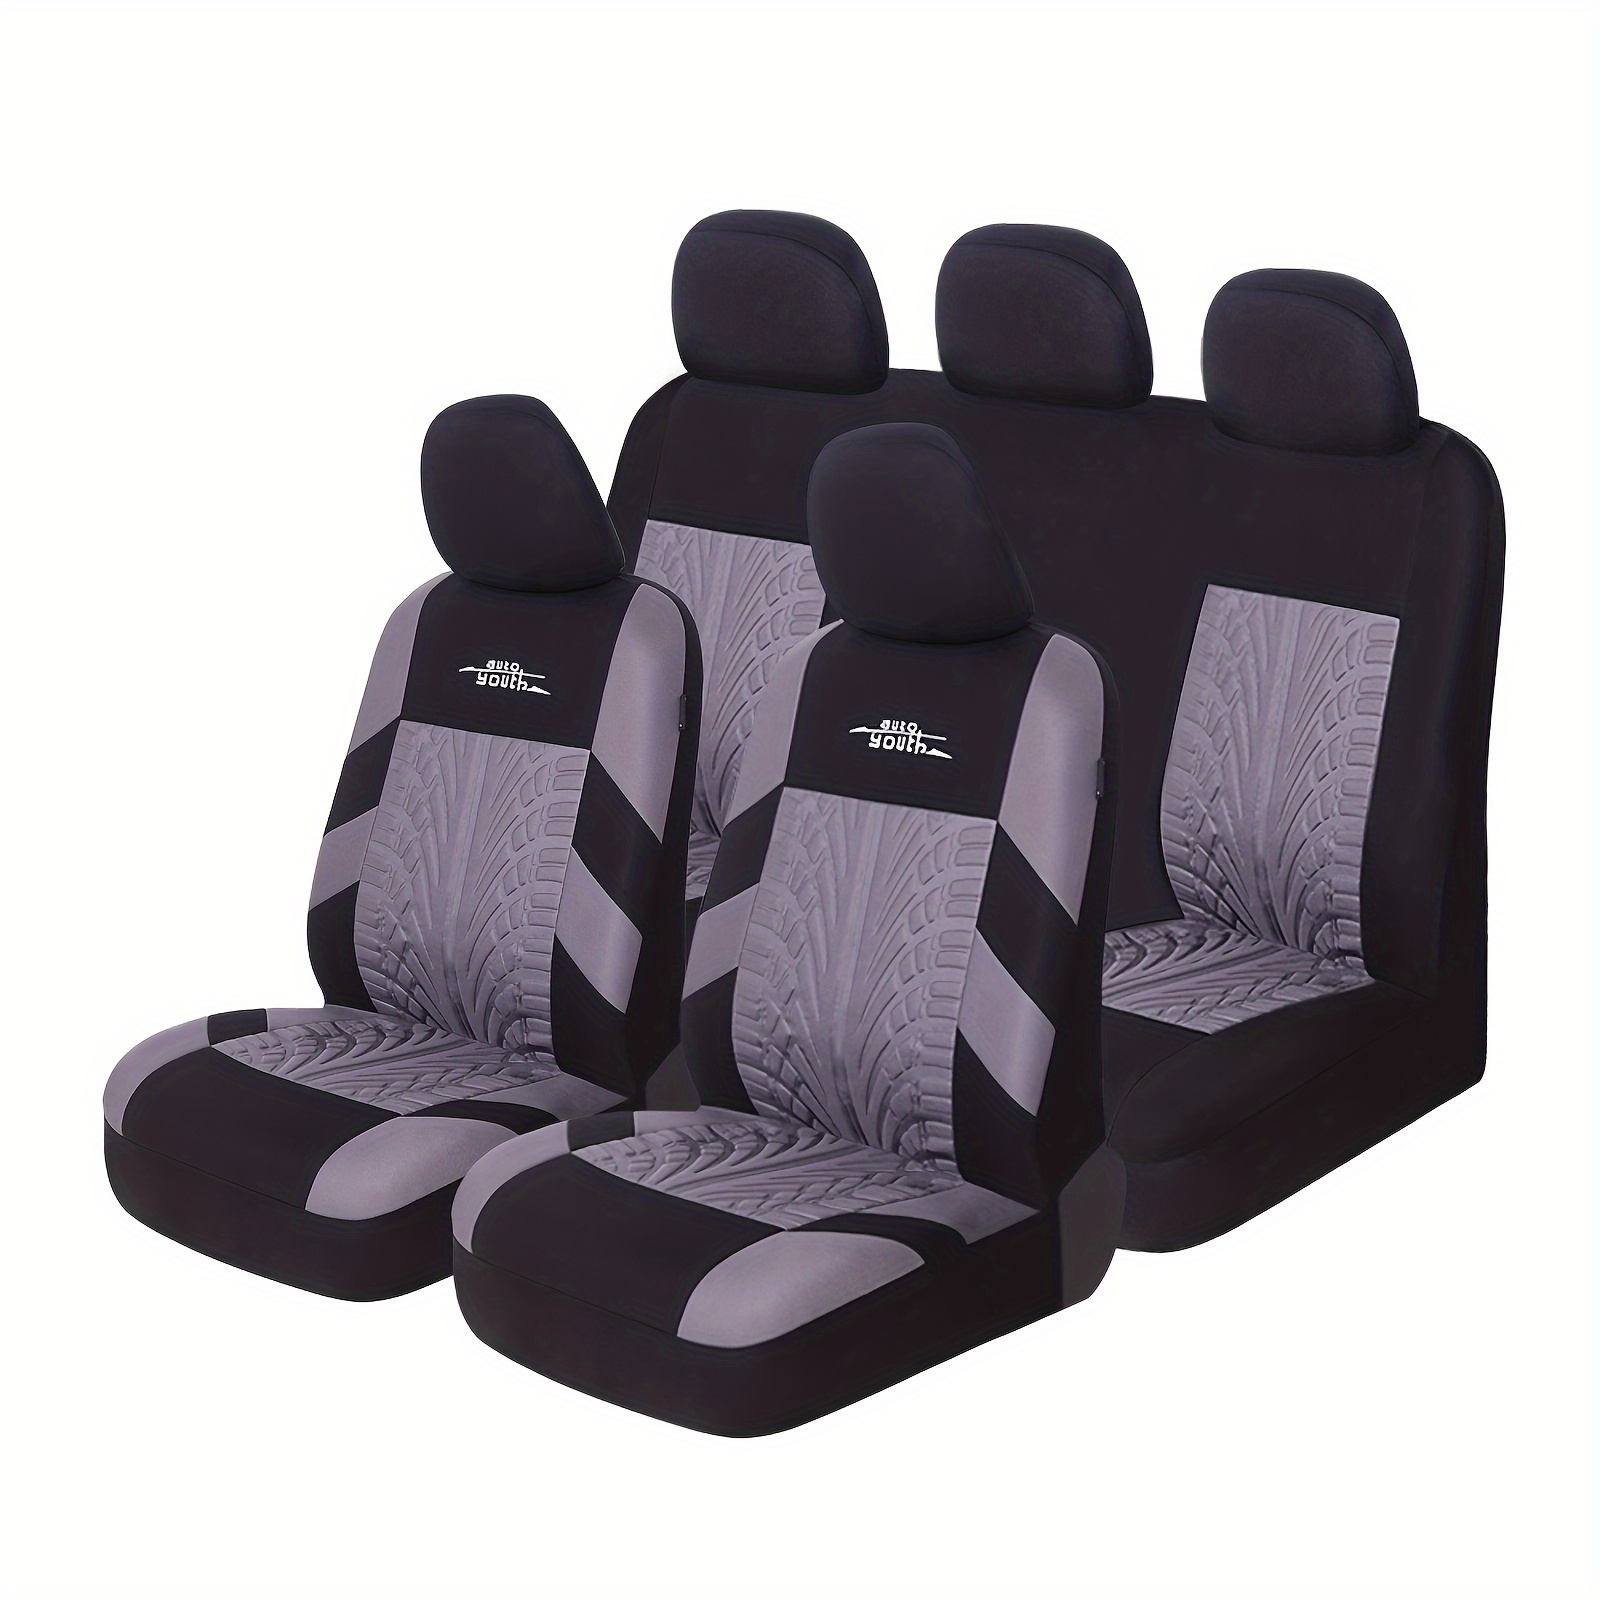 

Car Seat Covers Full Set, Front & Split Rear Bench For Car, 3d Tyre Print Automotive Interior Covers, Airbag Compatible, Quick Setup Universal Fit Seat Covers For Car, Truck, Suv (